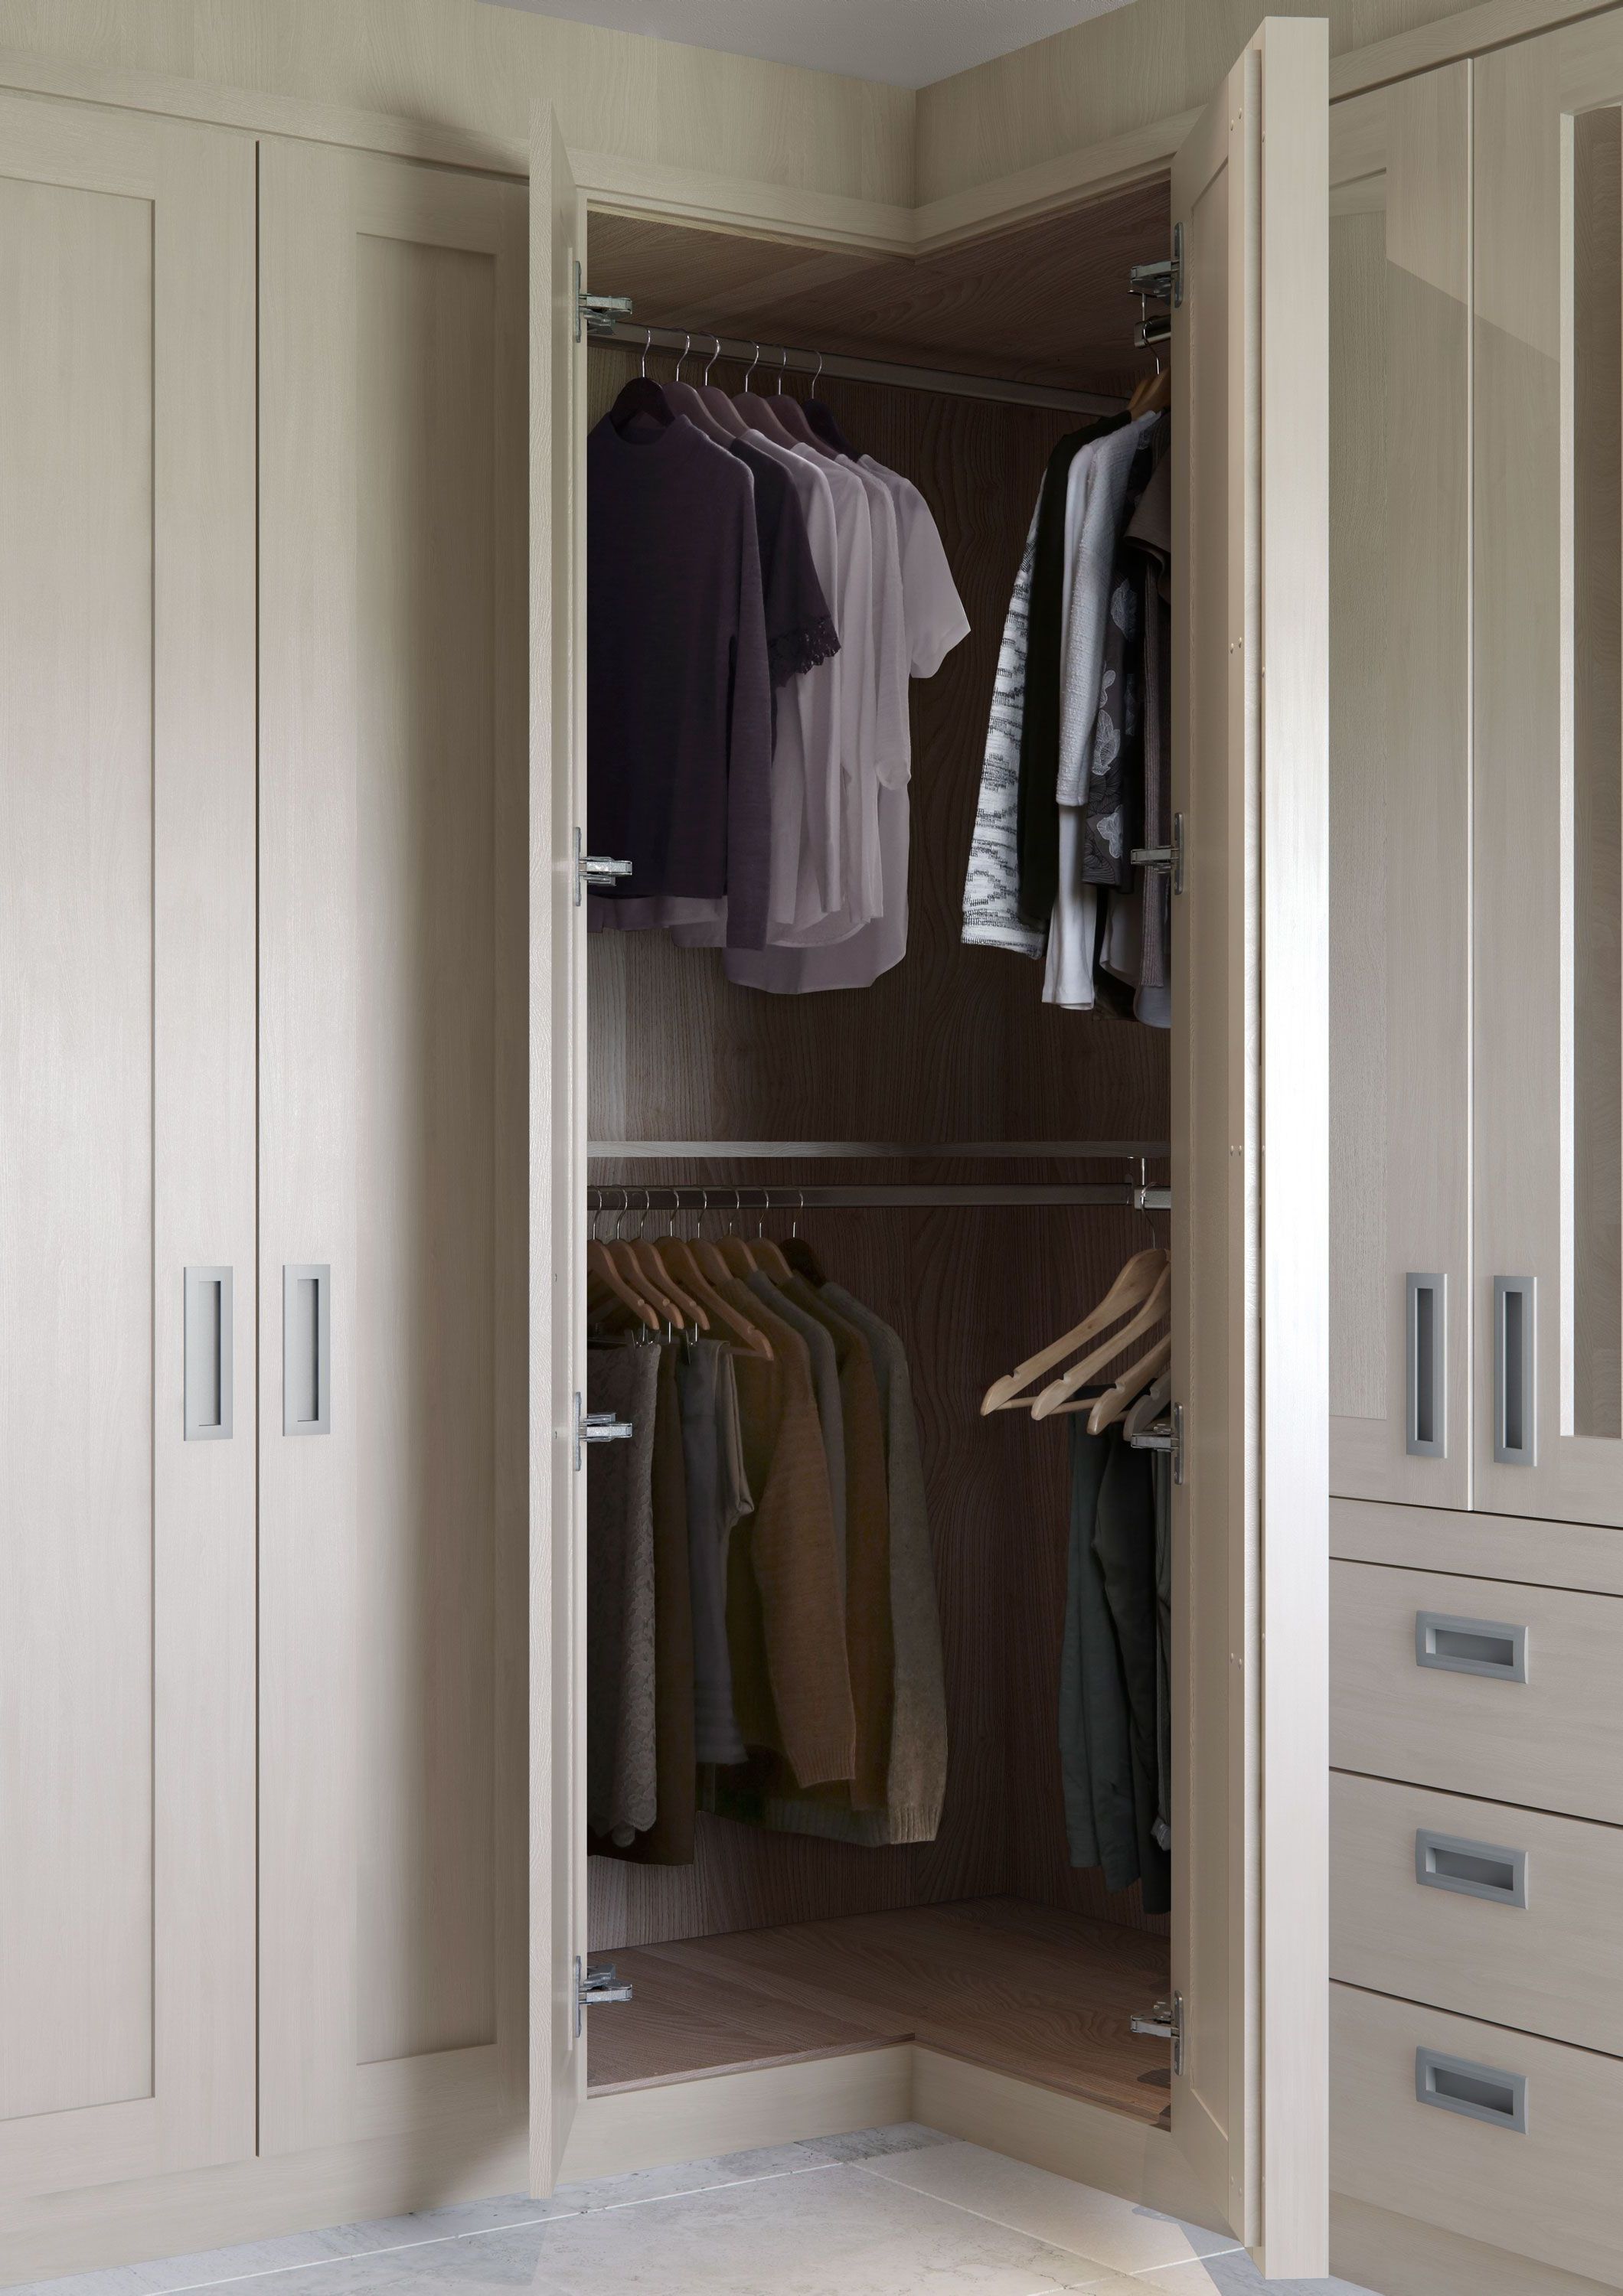 Make The Most Of The Corner Space With This Angled Double Hanging Rail. |  Corner Wardrobe, Corner Wardrobe Closet, Bedroom Built In Wardrobe For Wardrobes With Double Hanging Rail (Gallery 2 of 20)